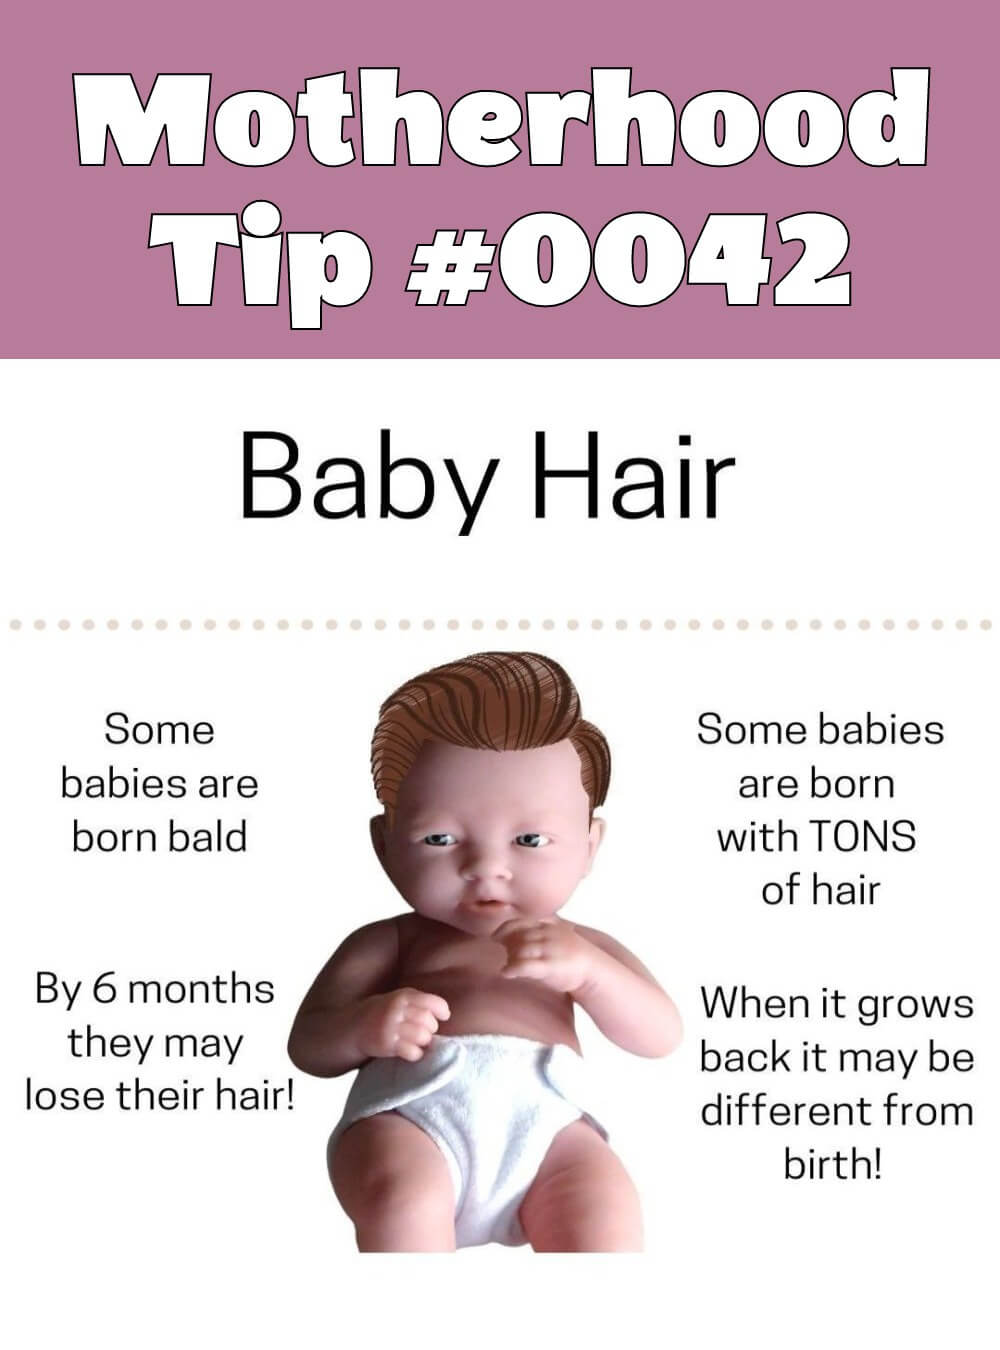 Parenting and Pregnancy Infographic | Motherhood Tip #0042